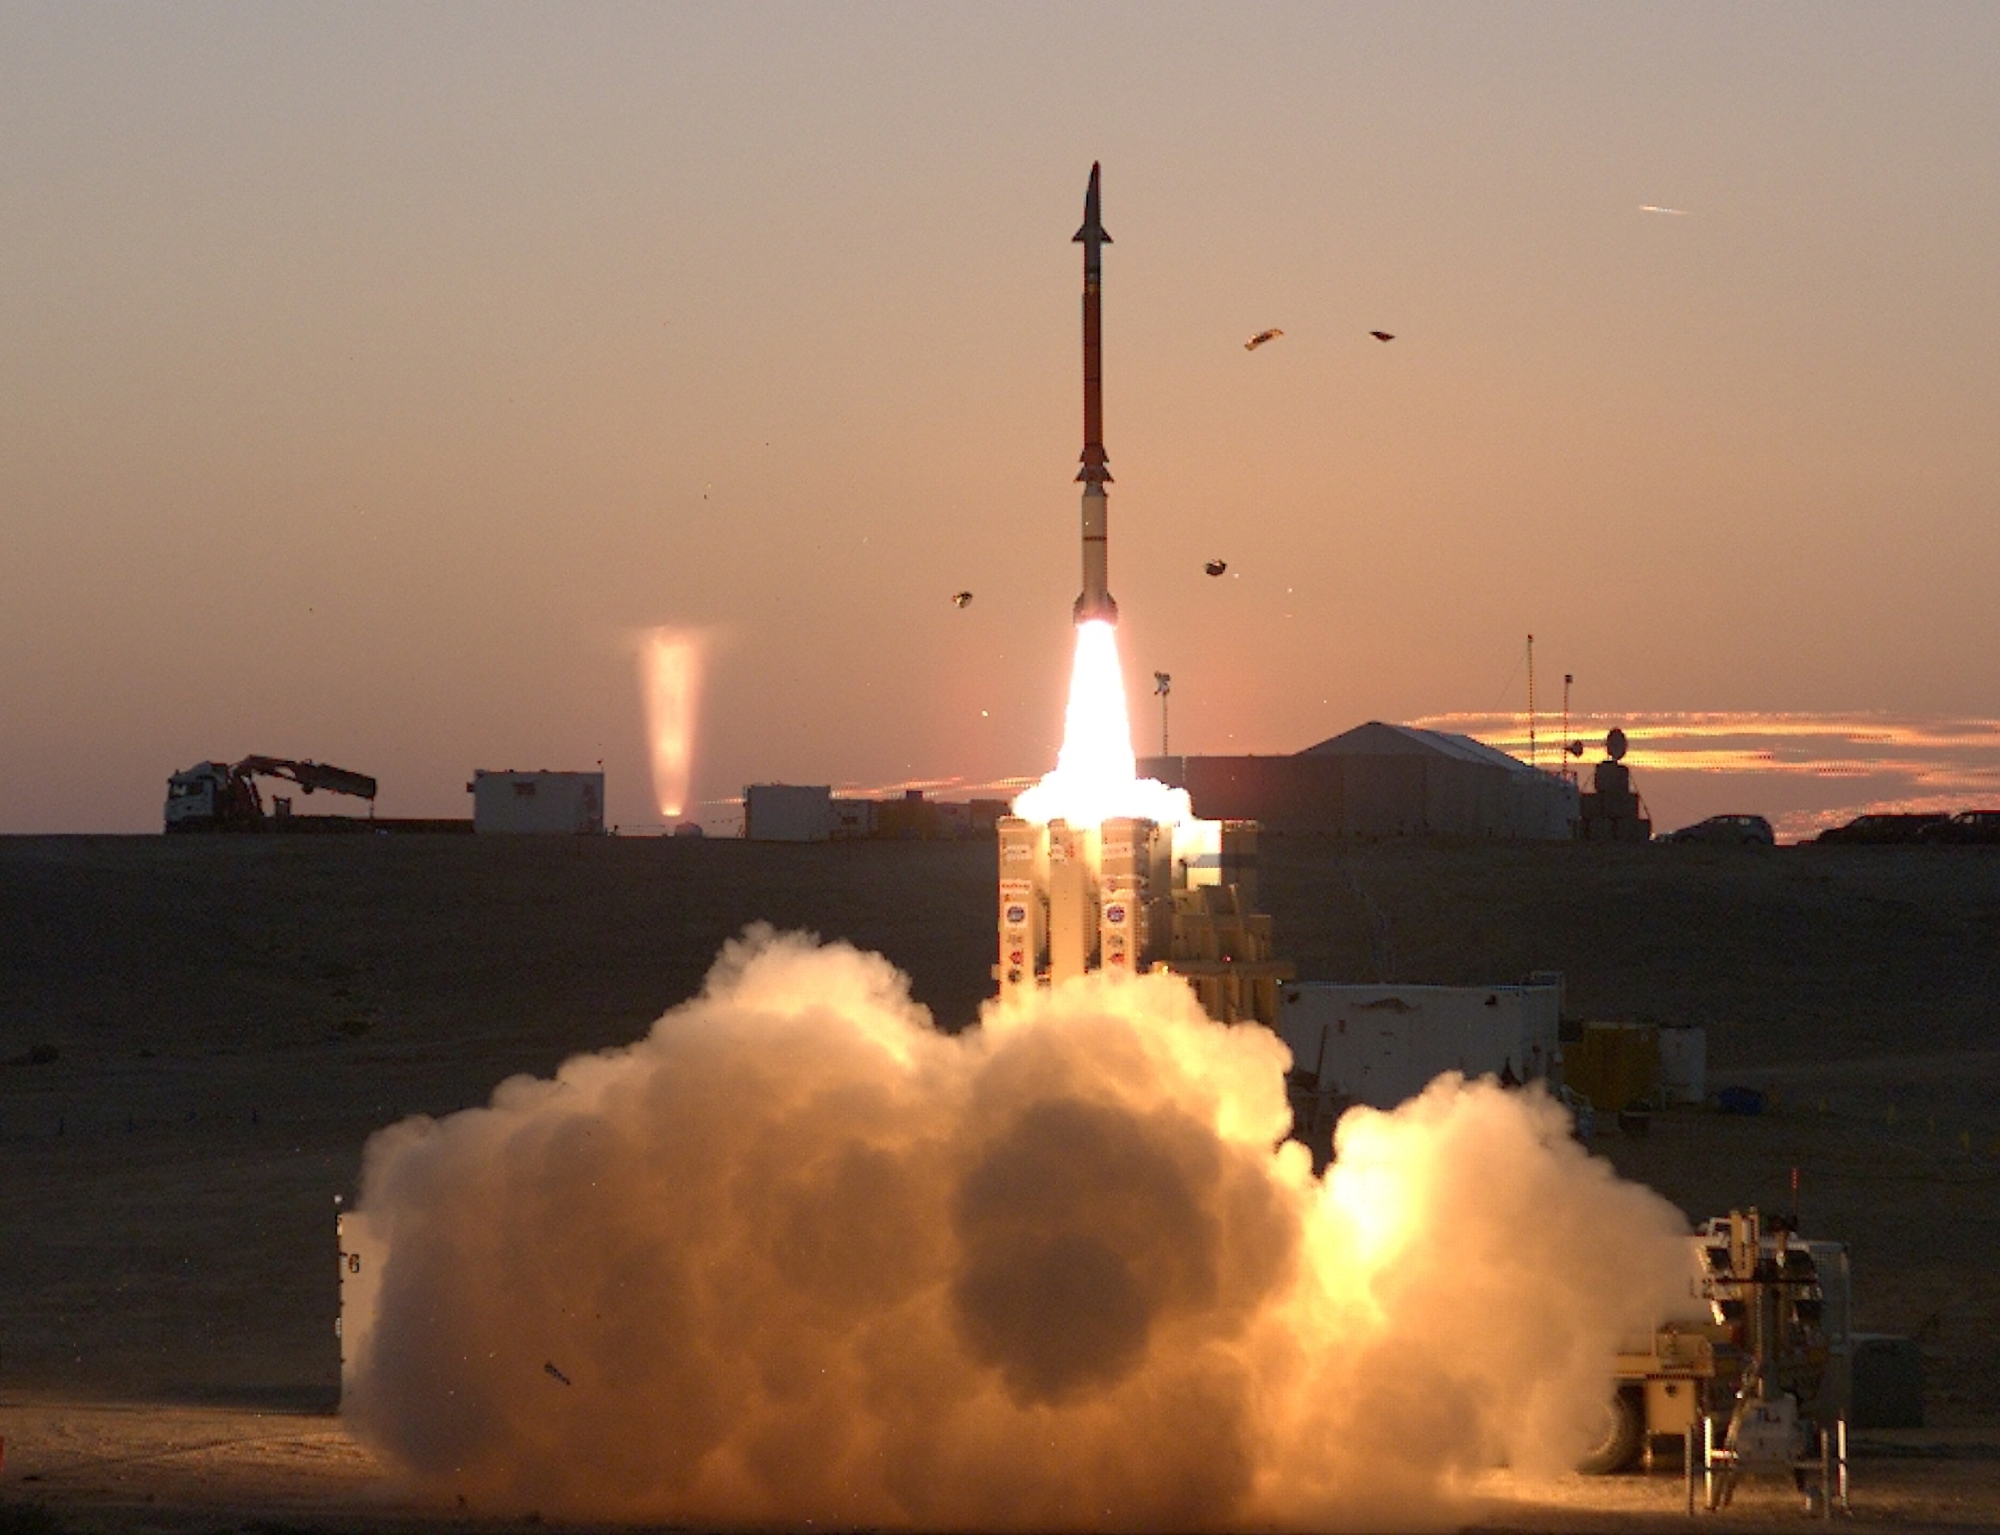 €316,000,000 contract: Finland buys David's Sling missile defence system from Israel